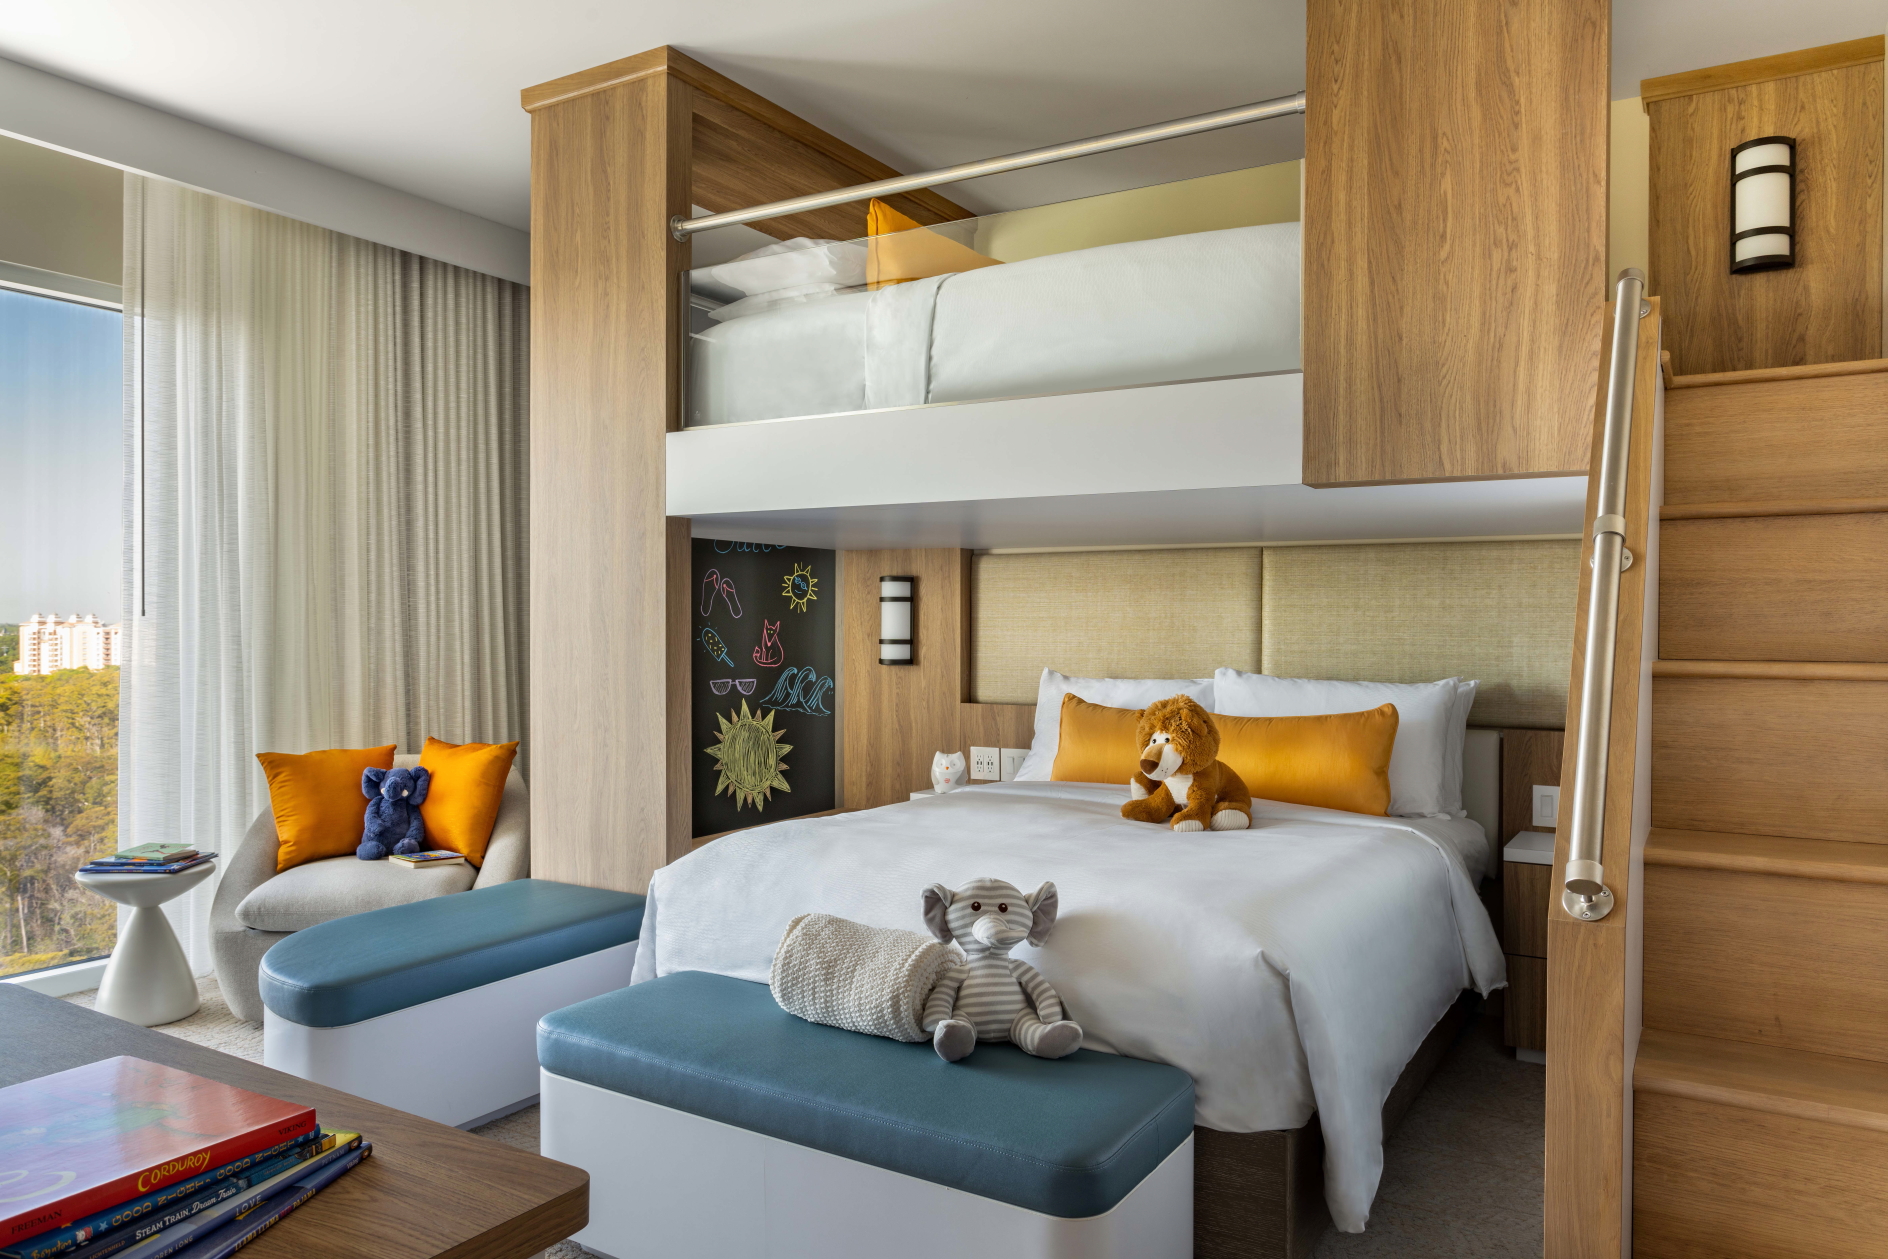 The JW Marriott Orlando Bonnet Creek Resort & Spa has opened four cleverly designed suites for families Click to enlarge.